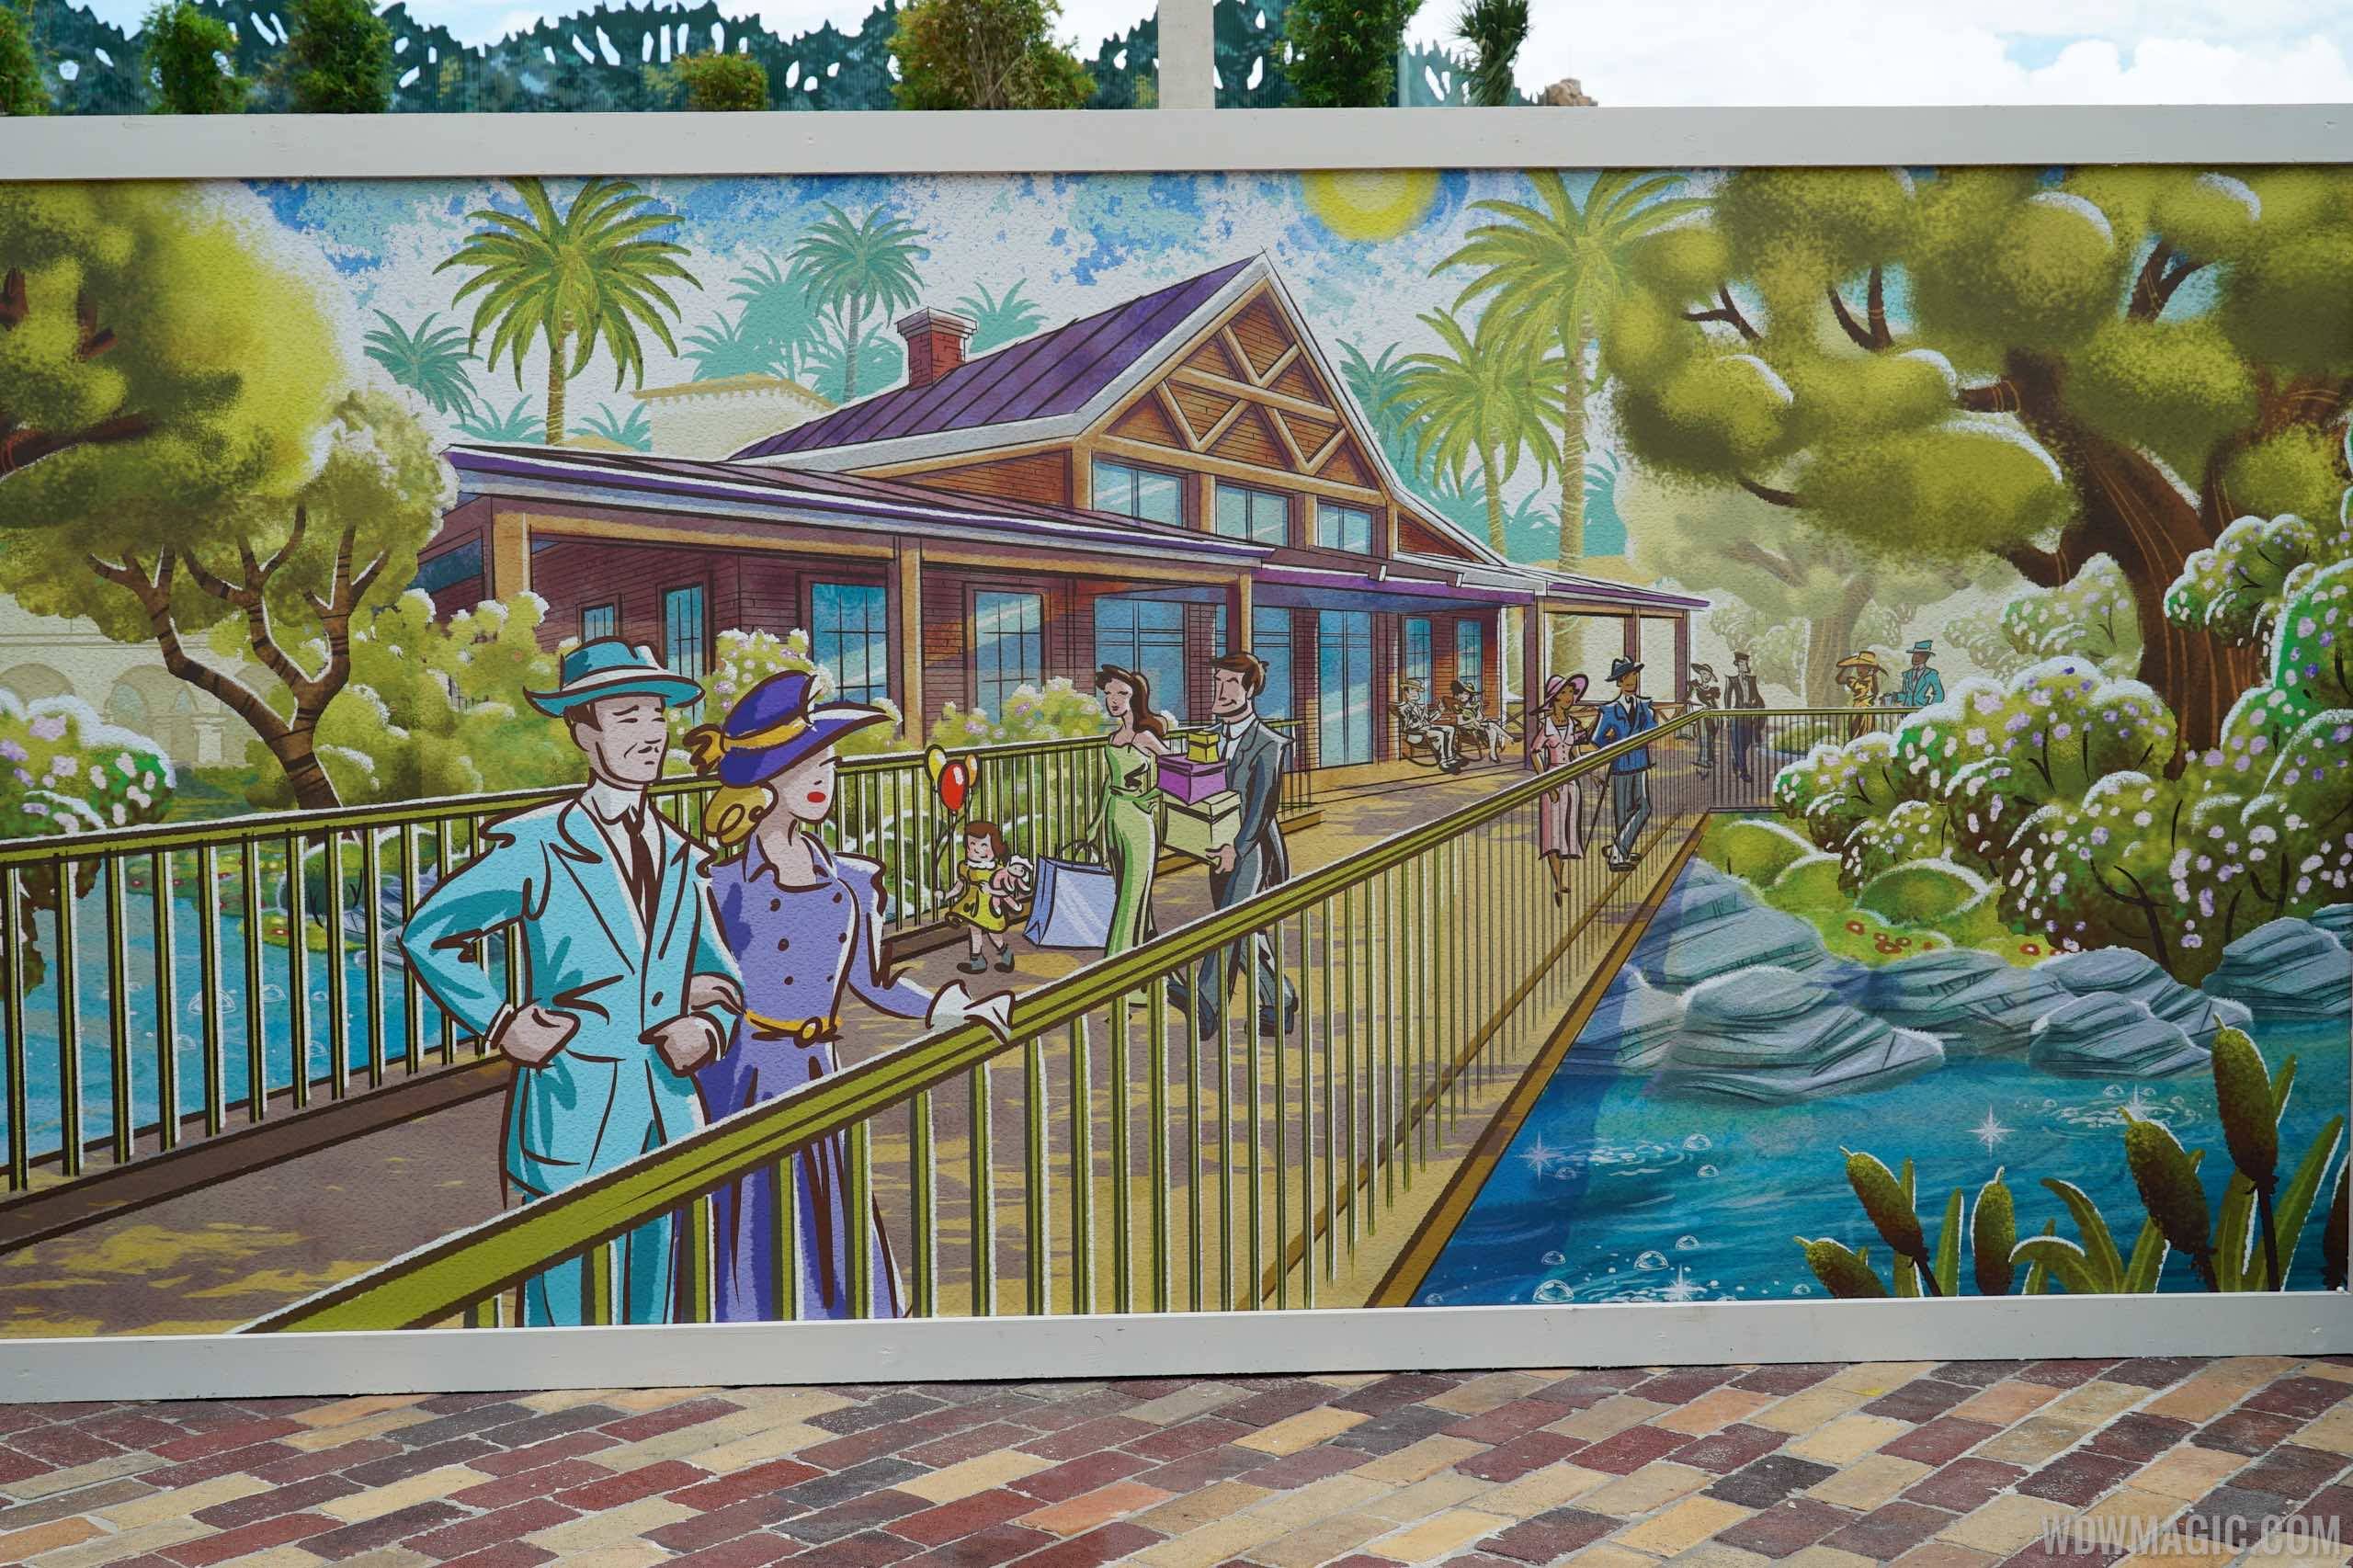 PHOTOS - New concept art gives a first look at what is coming next to Disney Springs